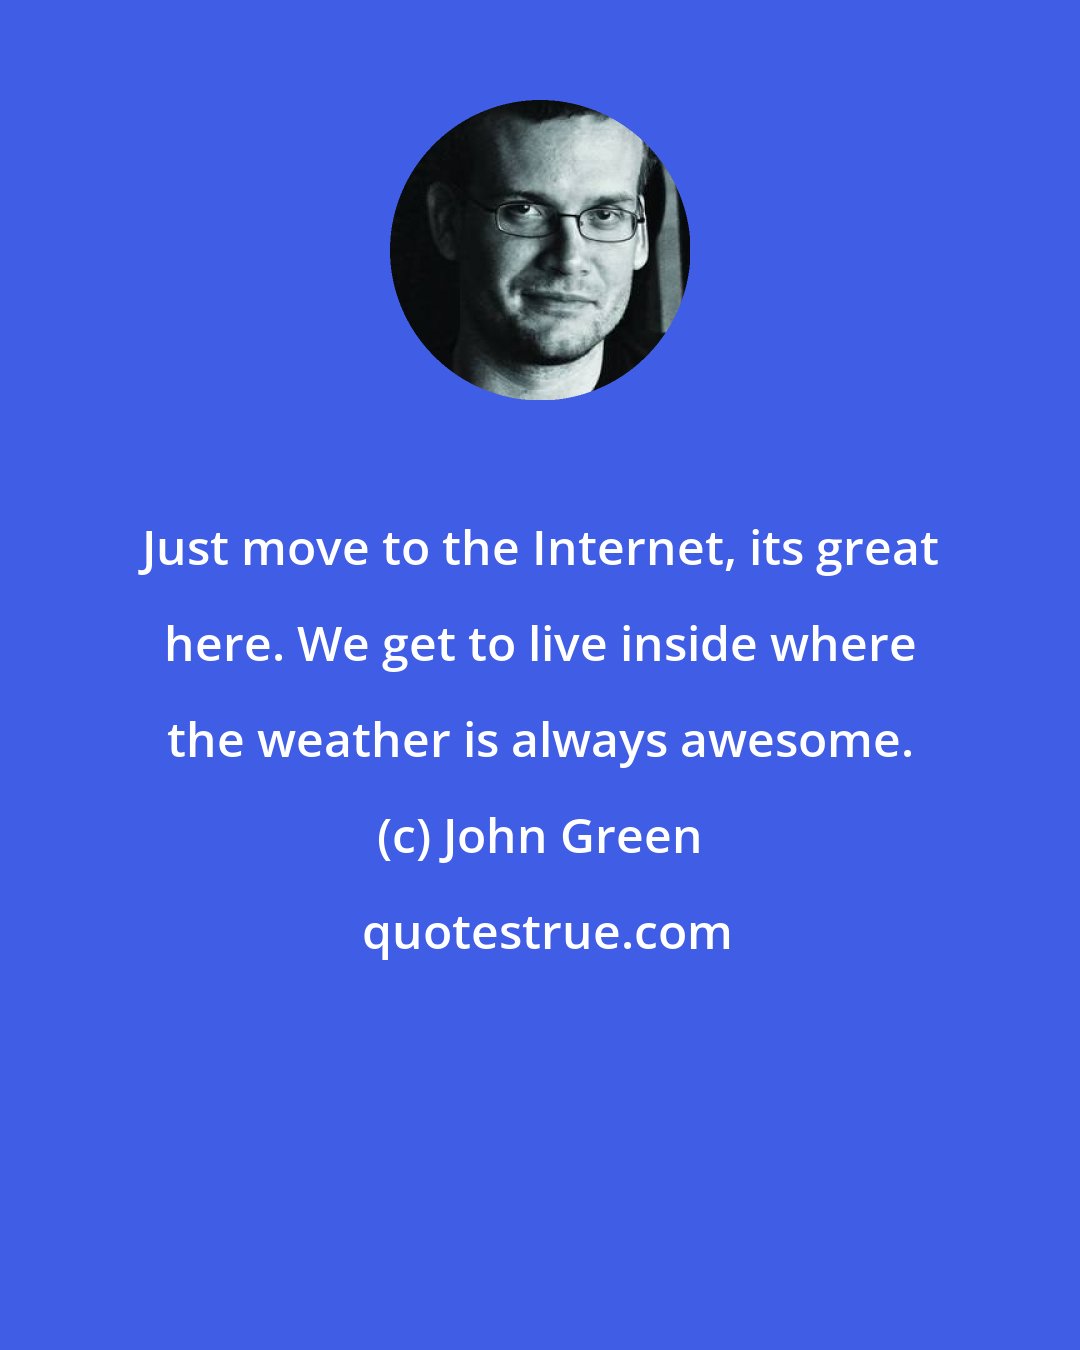 John Green: Just move to the Internet, its great here. We get to live inside where the weather is always awesome.